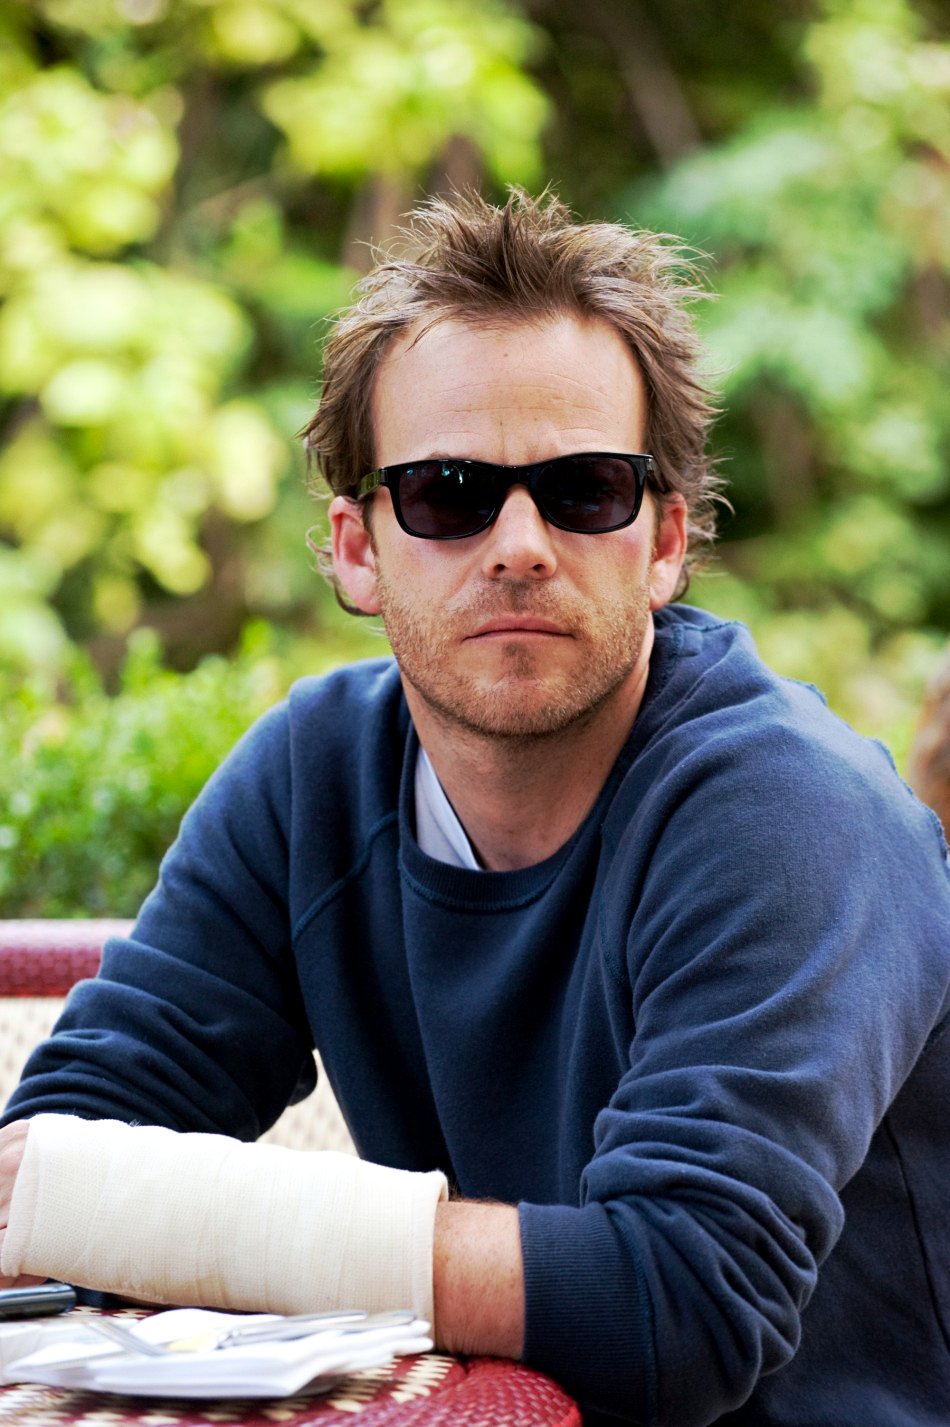 Stephen Dorff stars as Johnny Marco in Focus Features' Somewhere (2010). Photo credit by: Merick Morton.